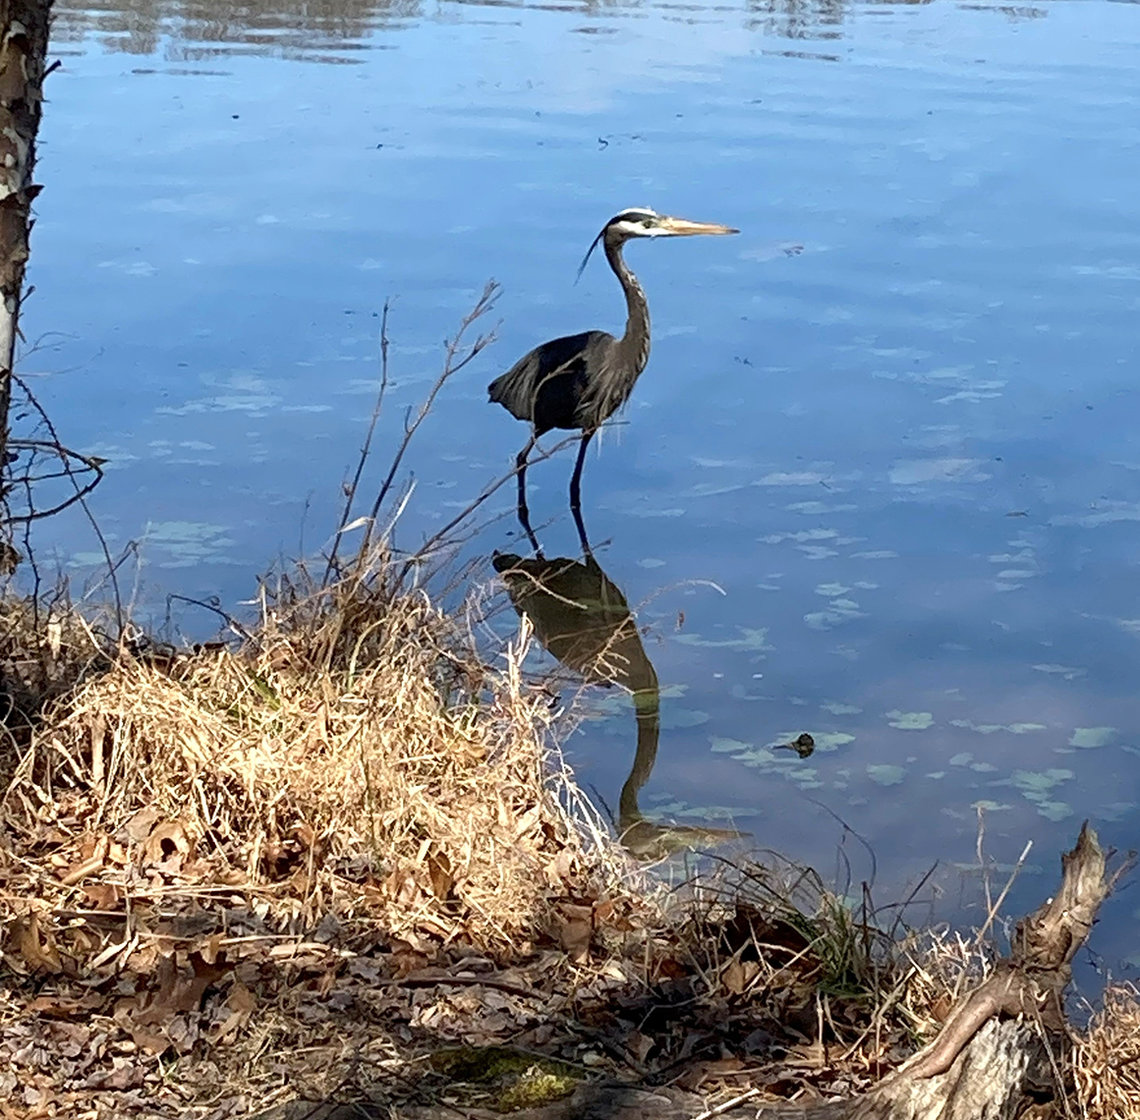 A blue heron stands in the creek.